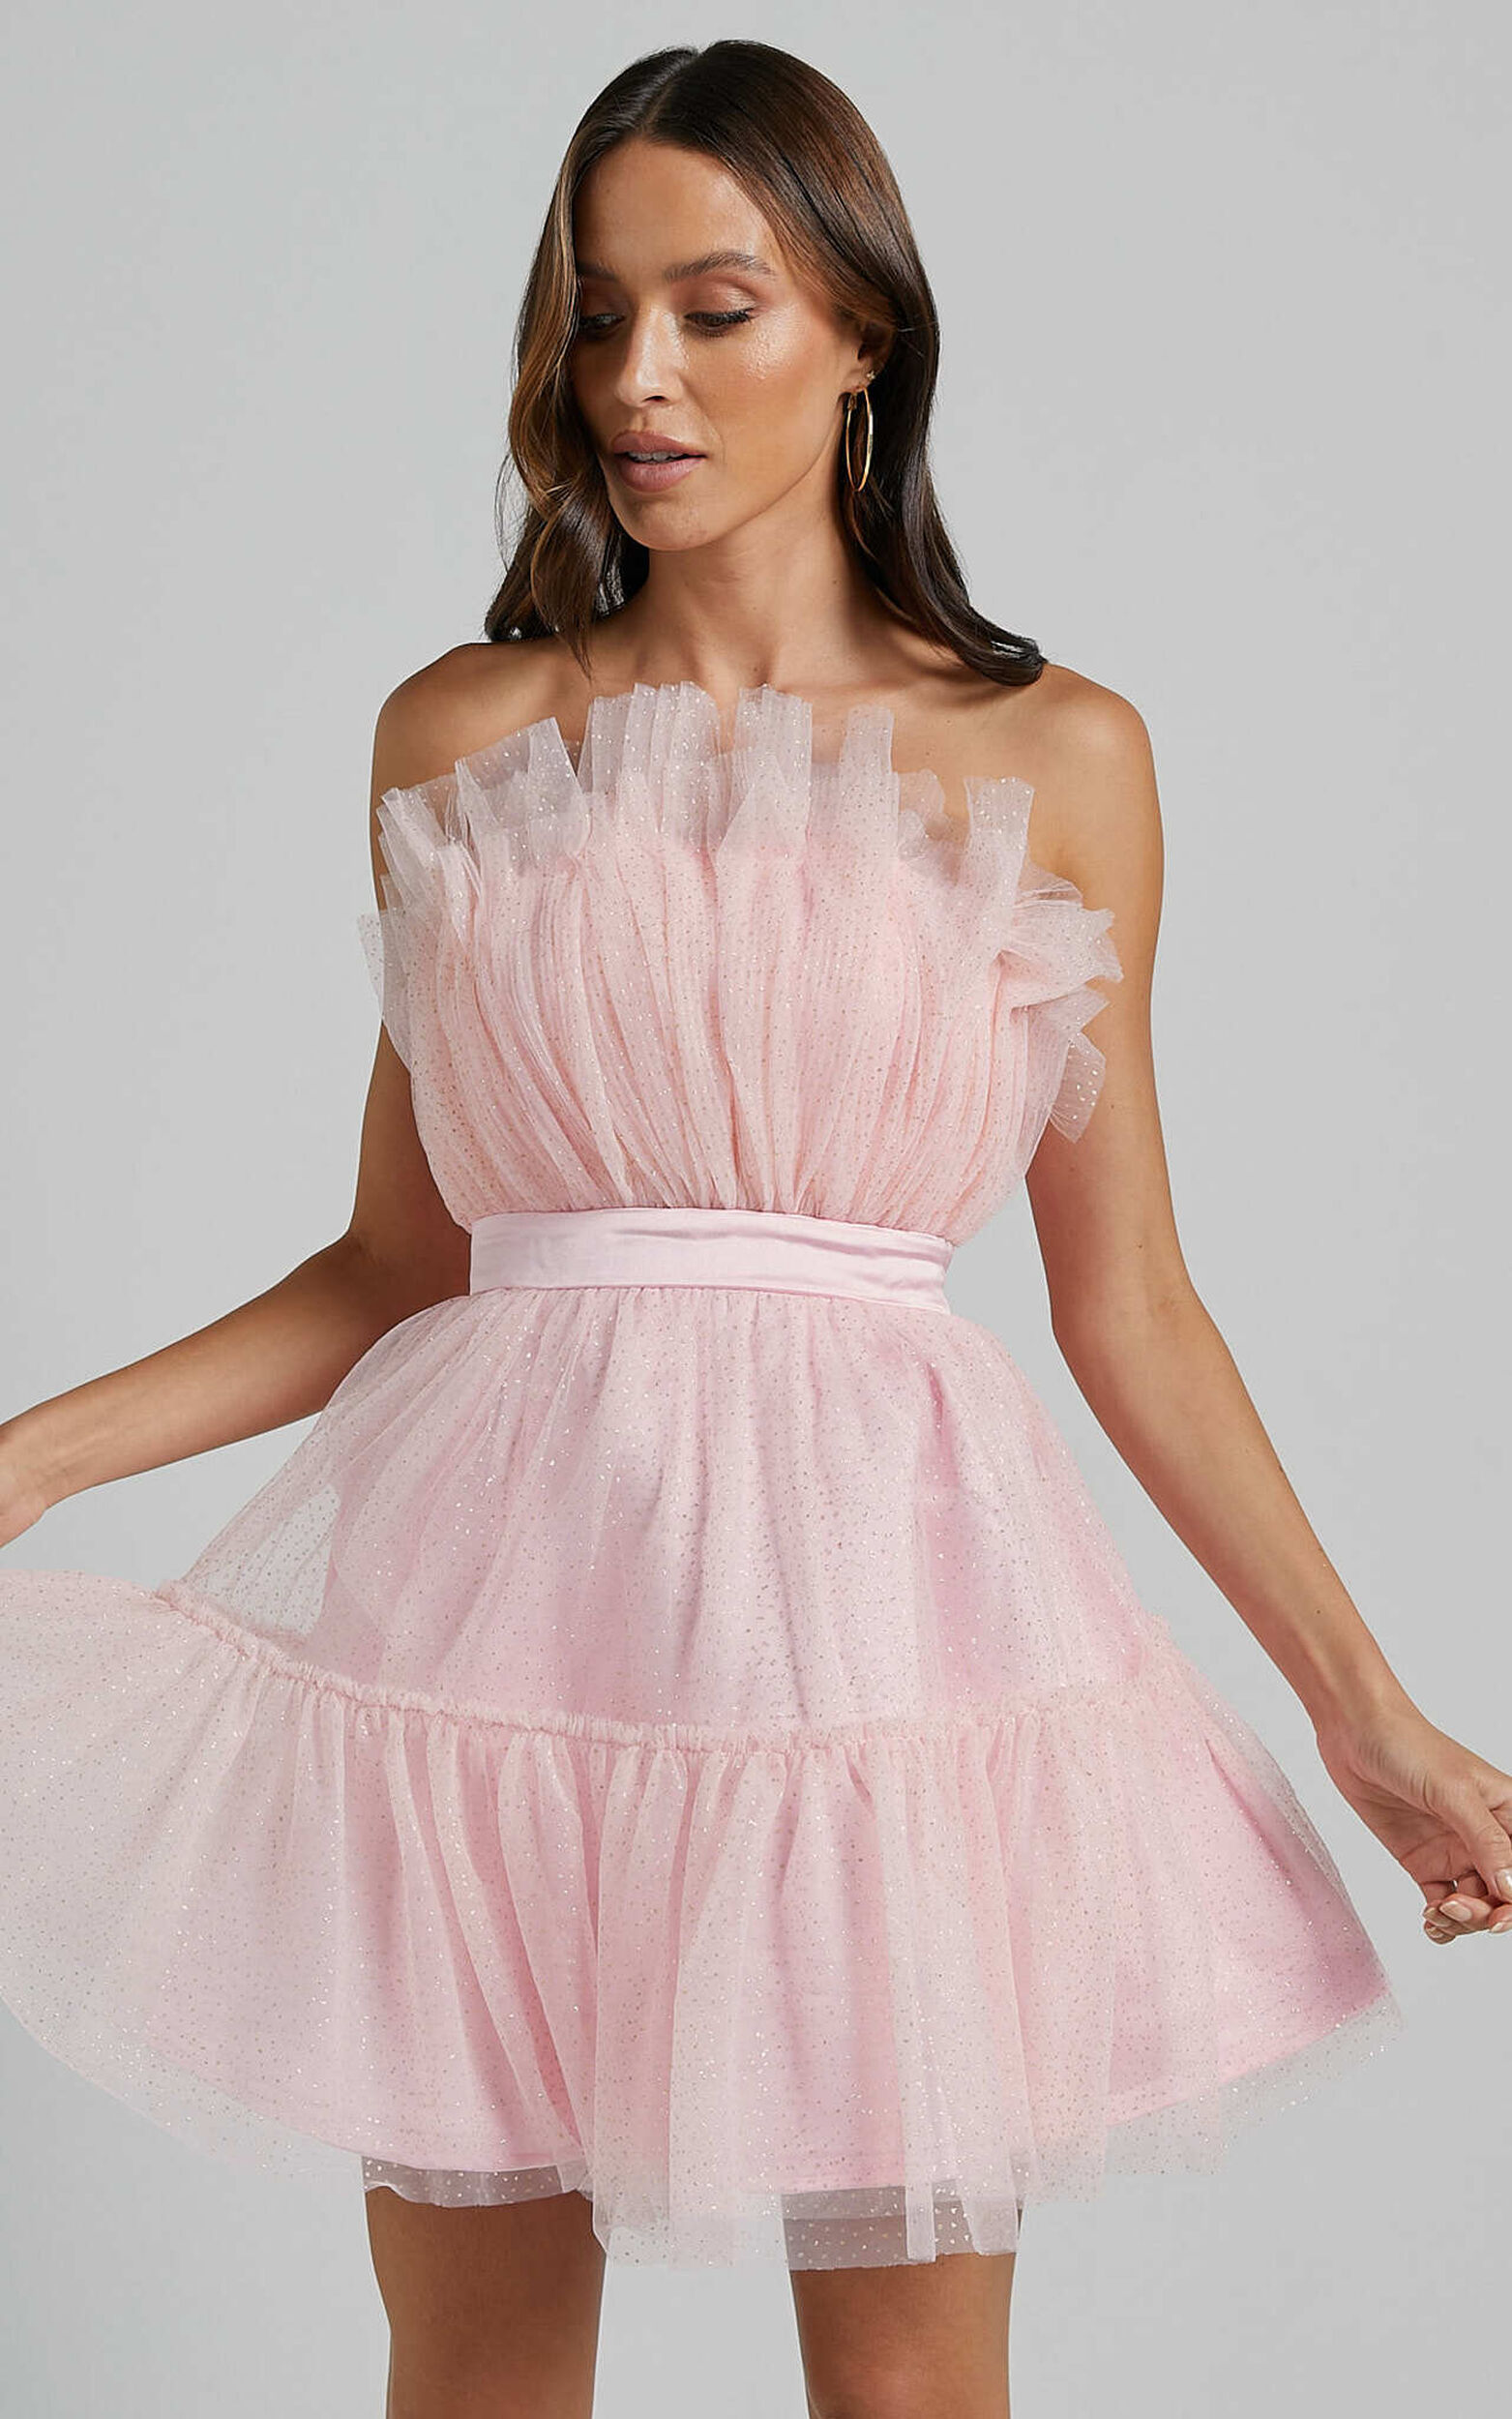 Amalya Mini Dress - Tiered Tulle Fit and Flare Dress in Baby Pink Glitter - 06, PNK1